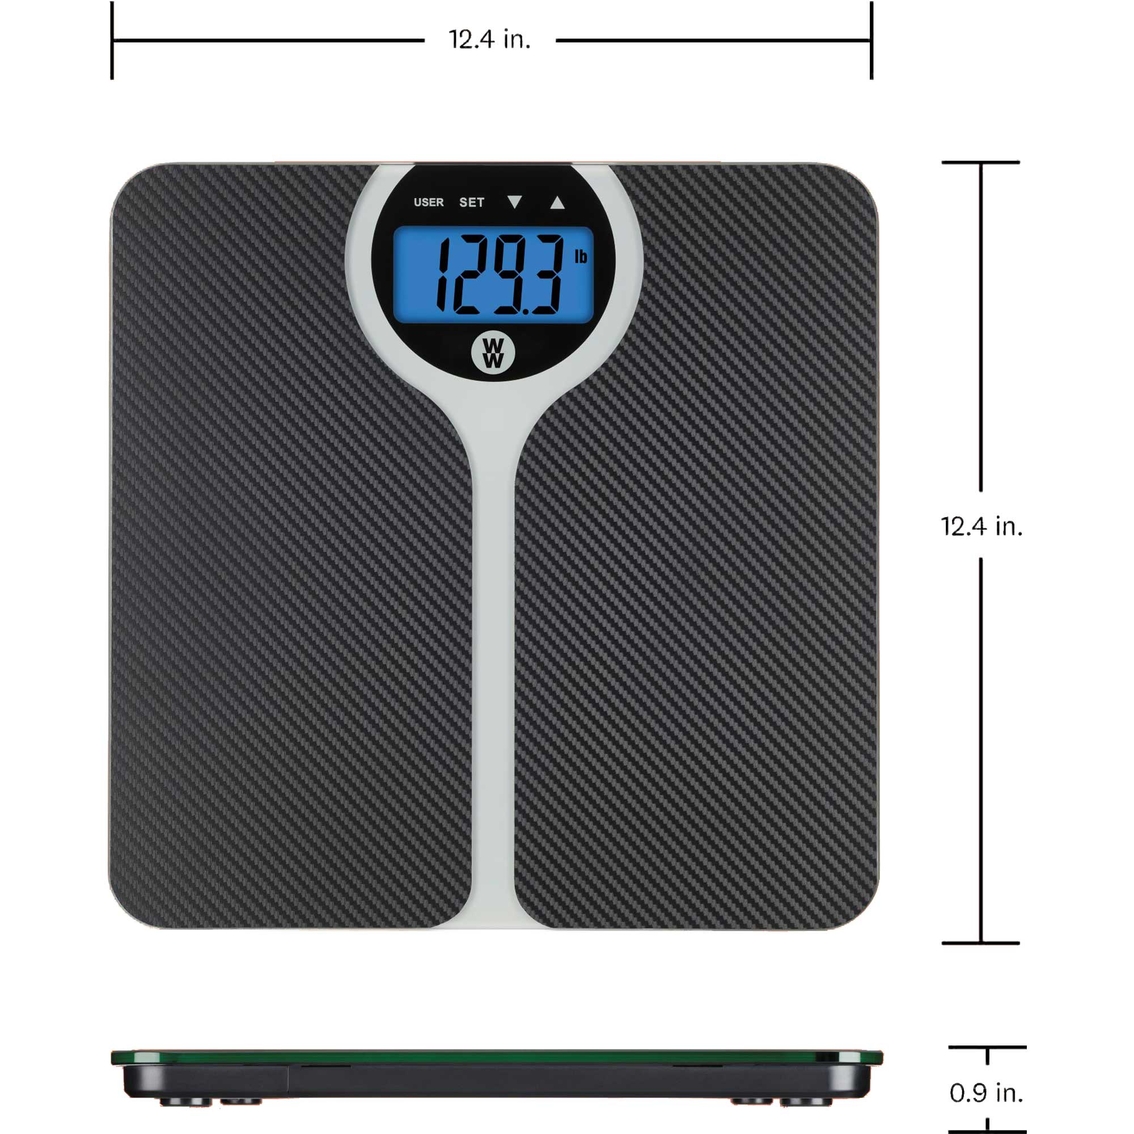 WW Scales by Conair Digital Carbon Fiber BMI Scale - Image 5 of 8